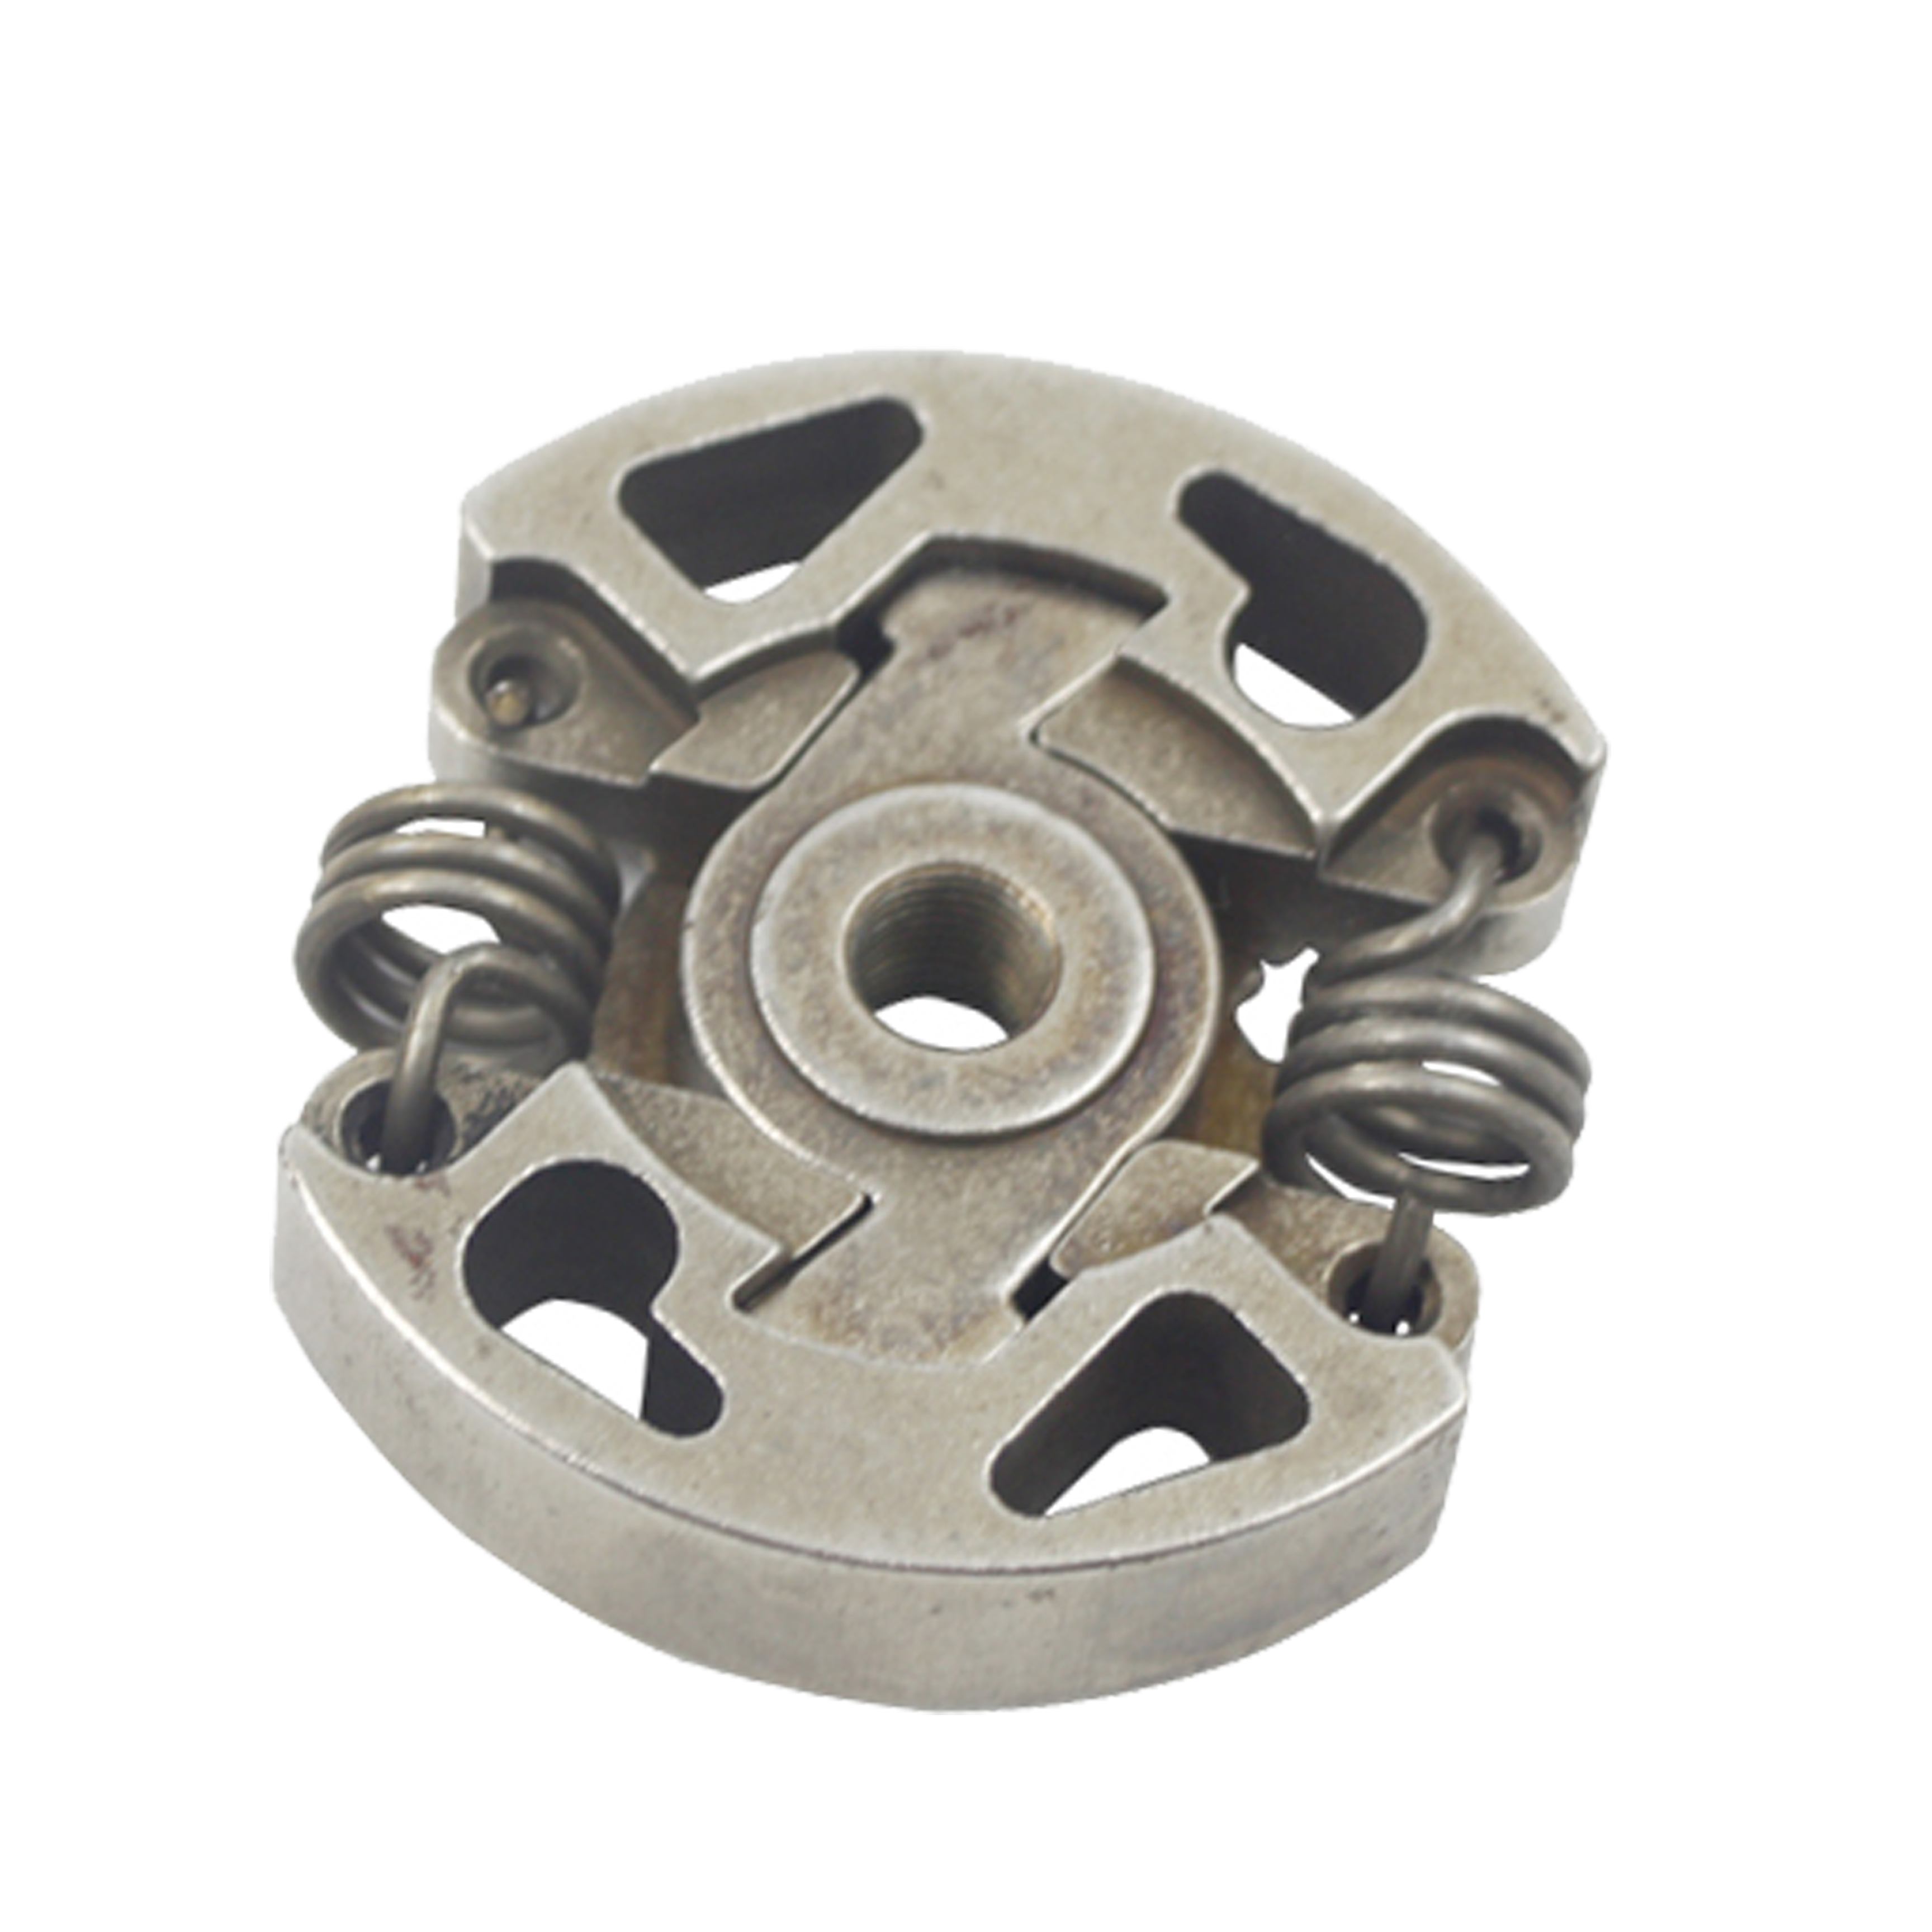 shiosheng Replacement Clutch Drum FS38 FS45 FS45C FS45L FS46 FS46C FS55 FS55C FS55R FS55RC FC55 HL45 KM55 KM55R Filfeel Engines String Trimmer Strimmers Brush Parts Cutters 4144 160 2904 4144 160 290 